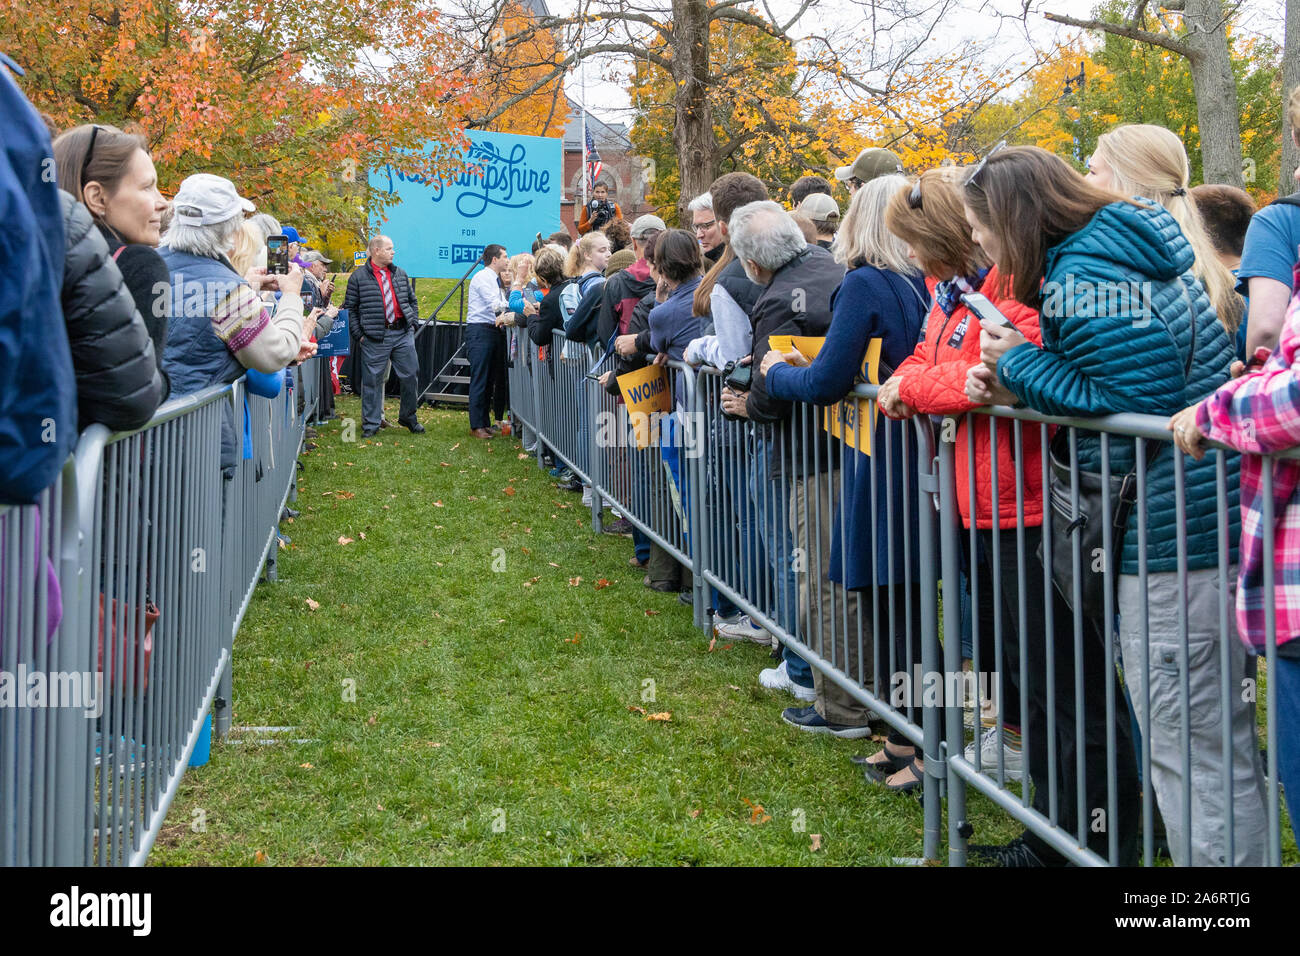 October 25, 2019, University of New Hampshire in Durham, New Hampshire: Mayor Pete Buttigieg is at the end of walk way, shaking hands of supporters af Stock Photo